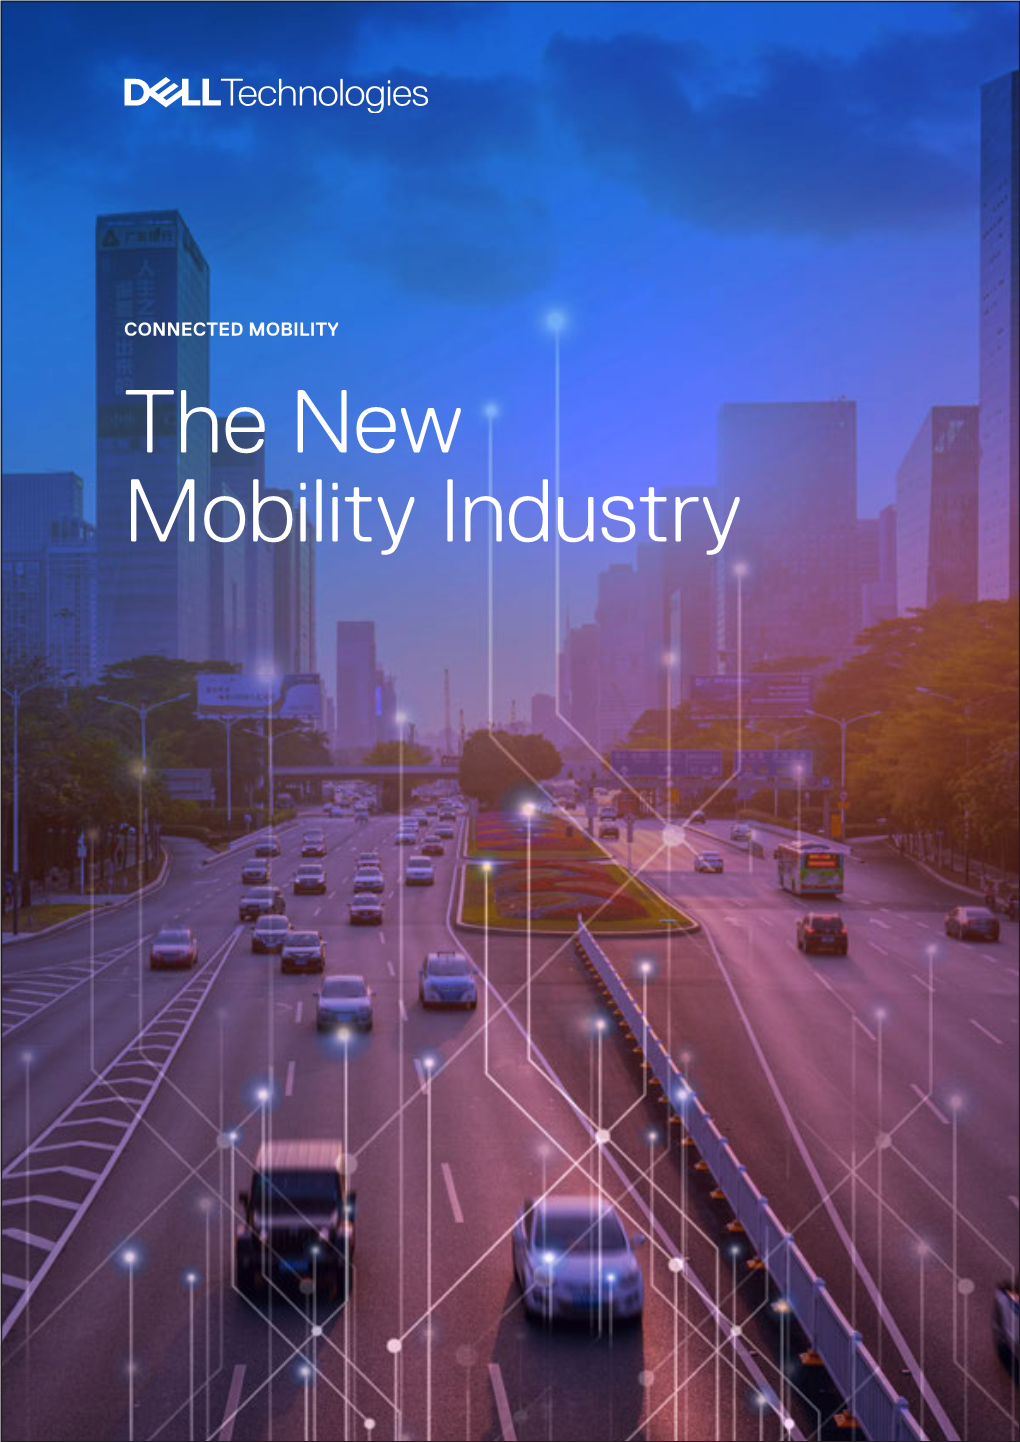 The New Mobility Industry Index